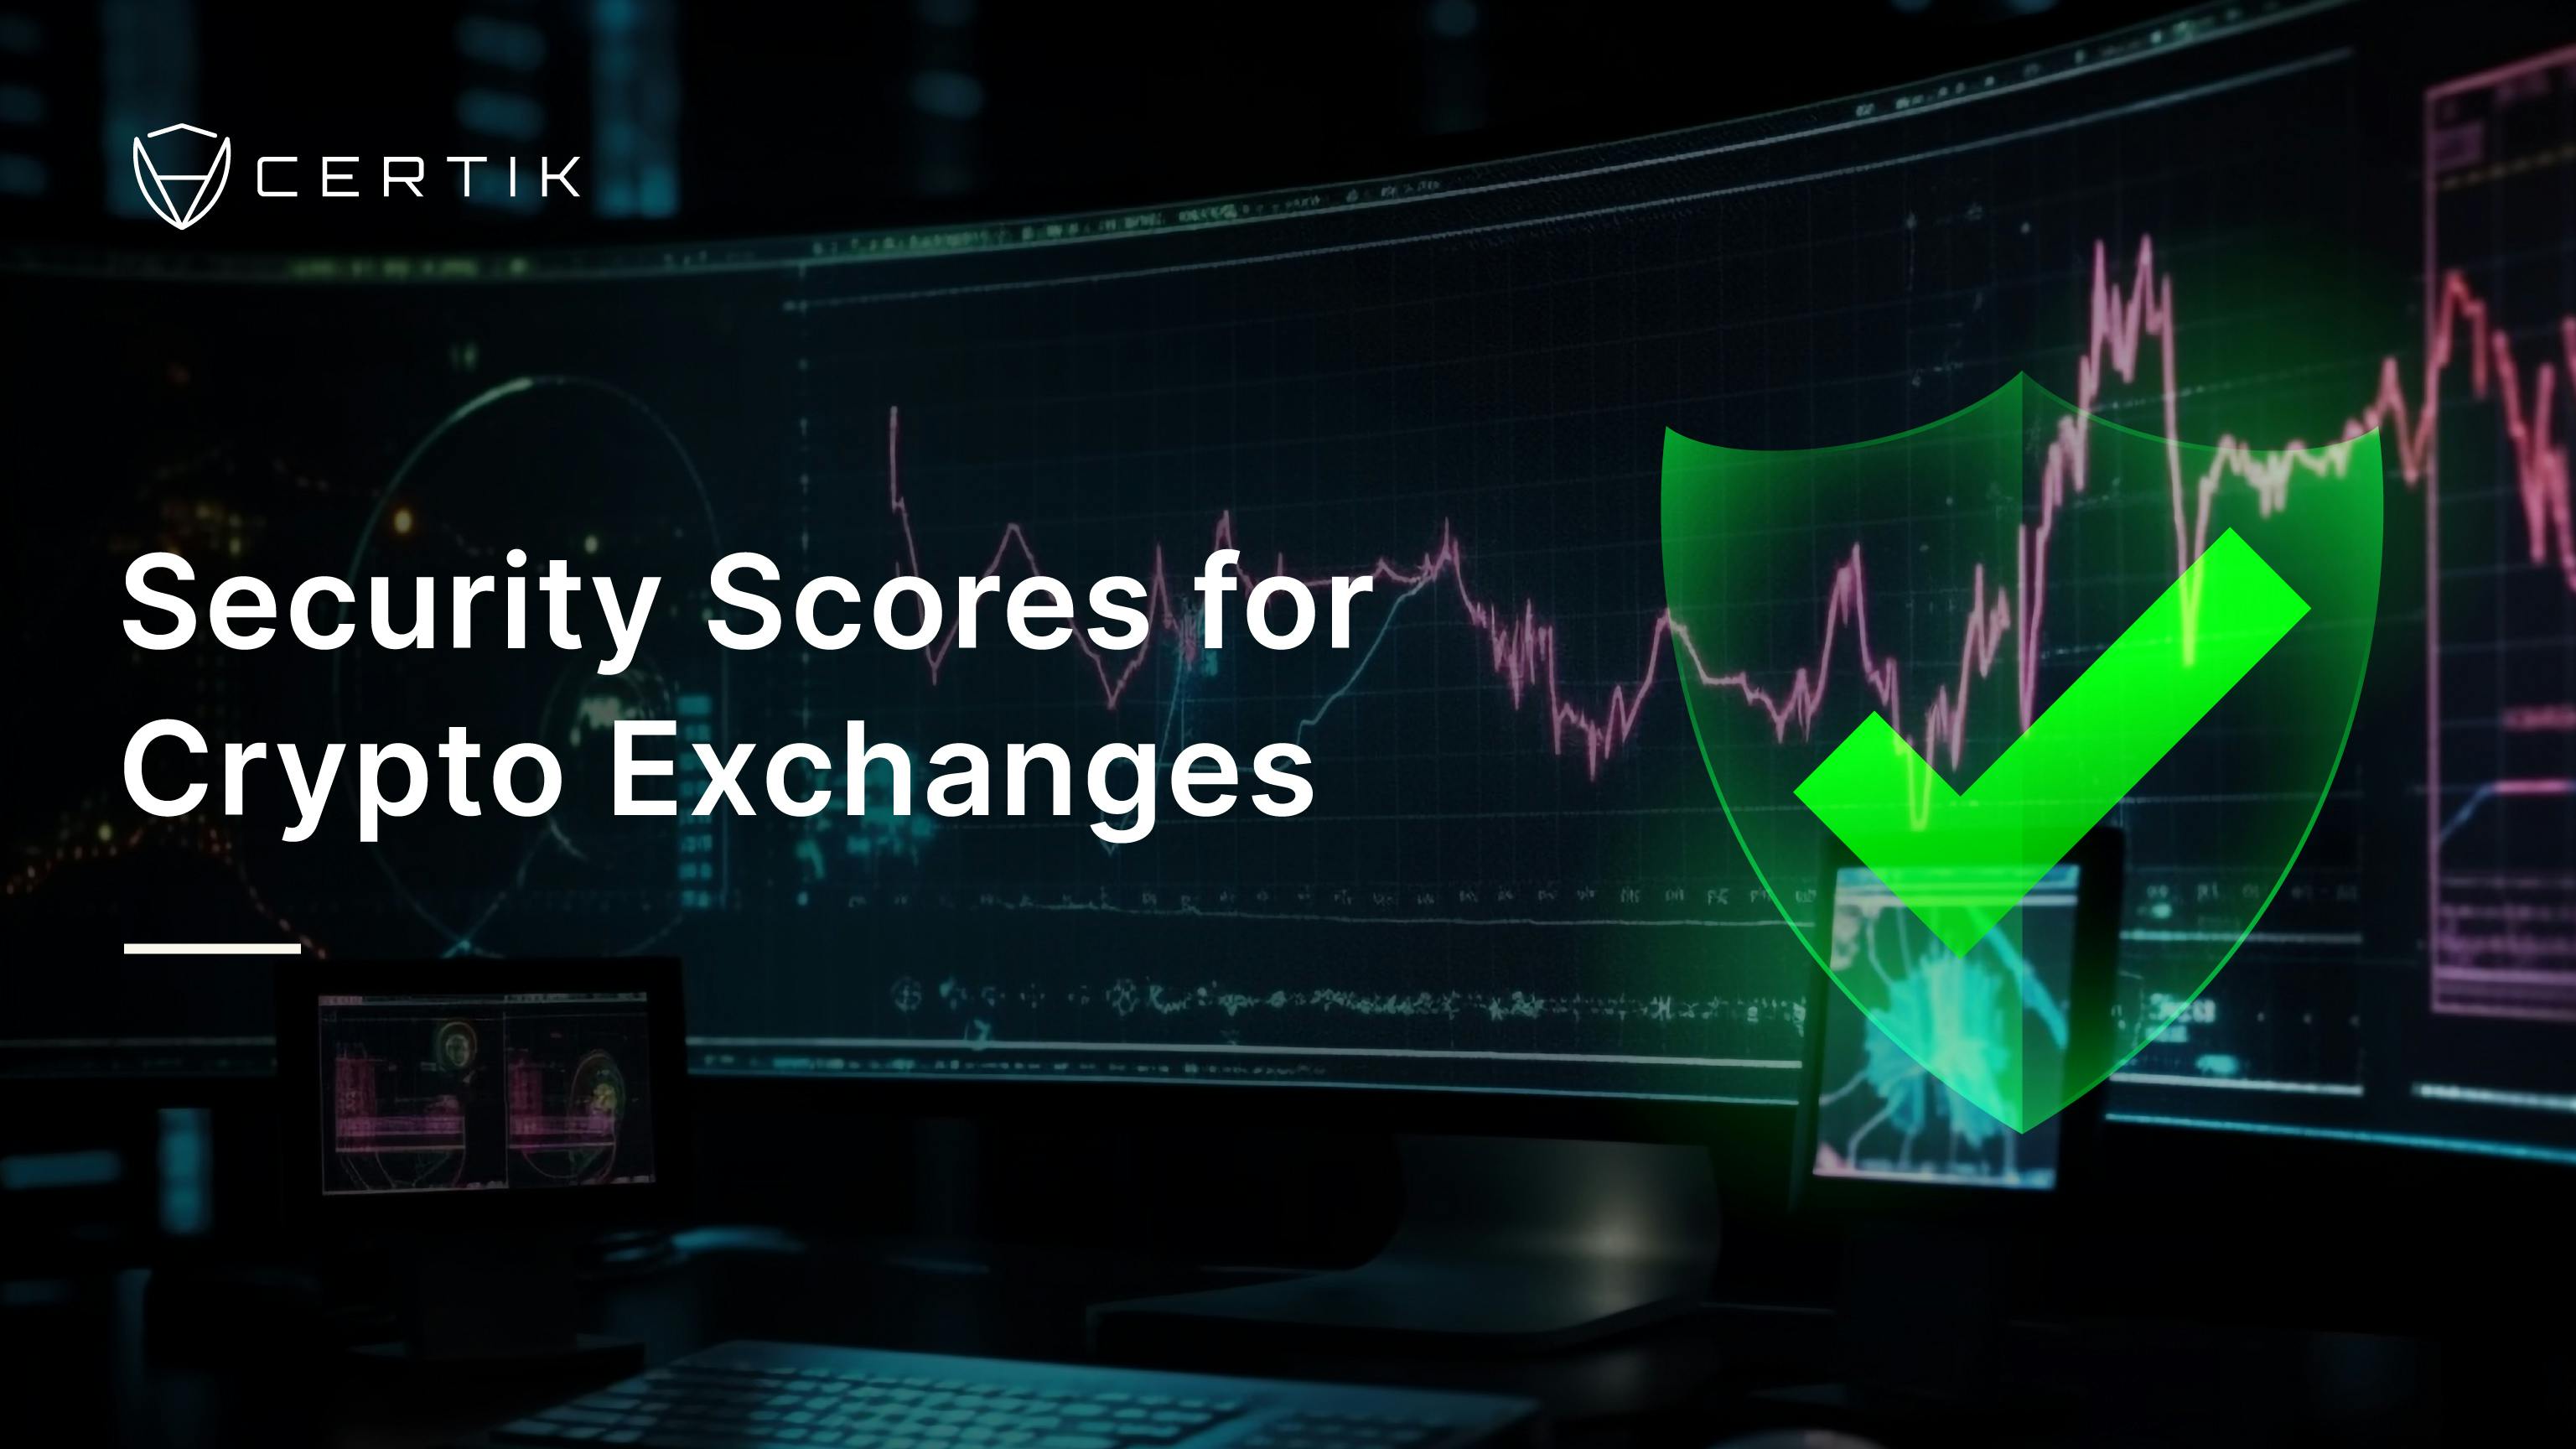 Introducing Skynet Security Scores for Crypto Exchanges